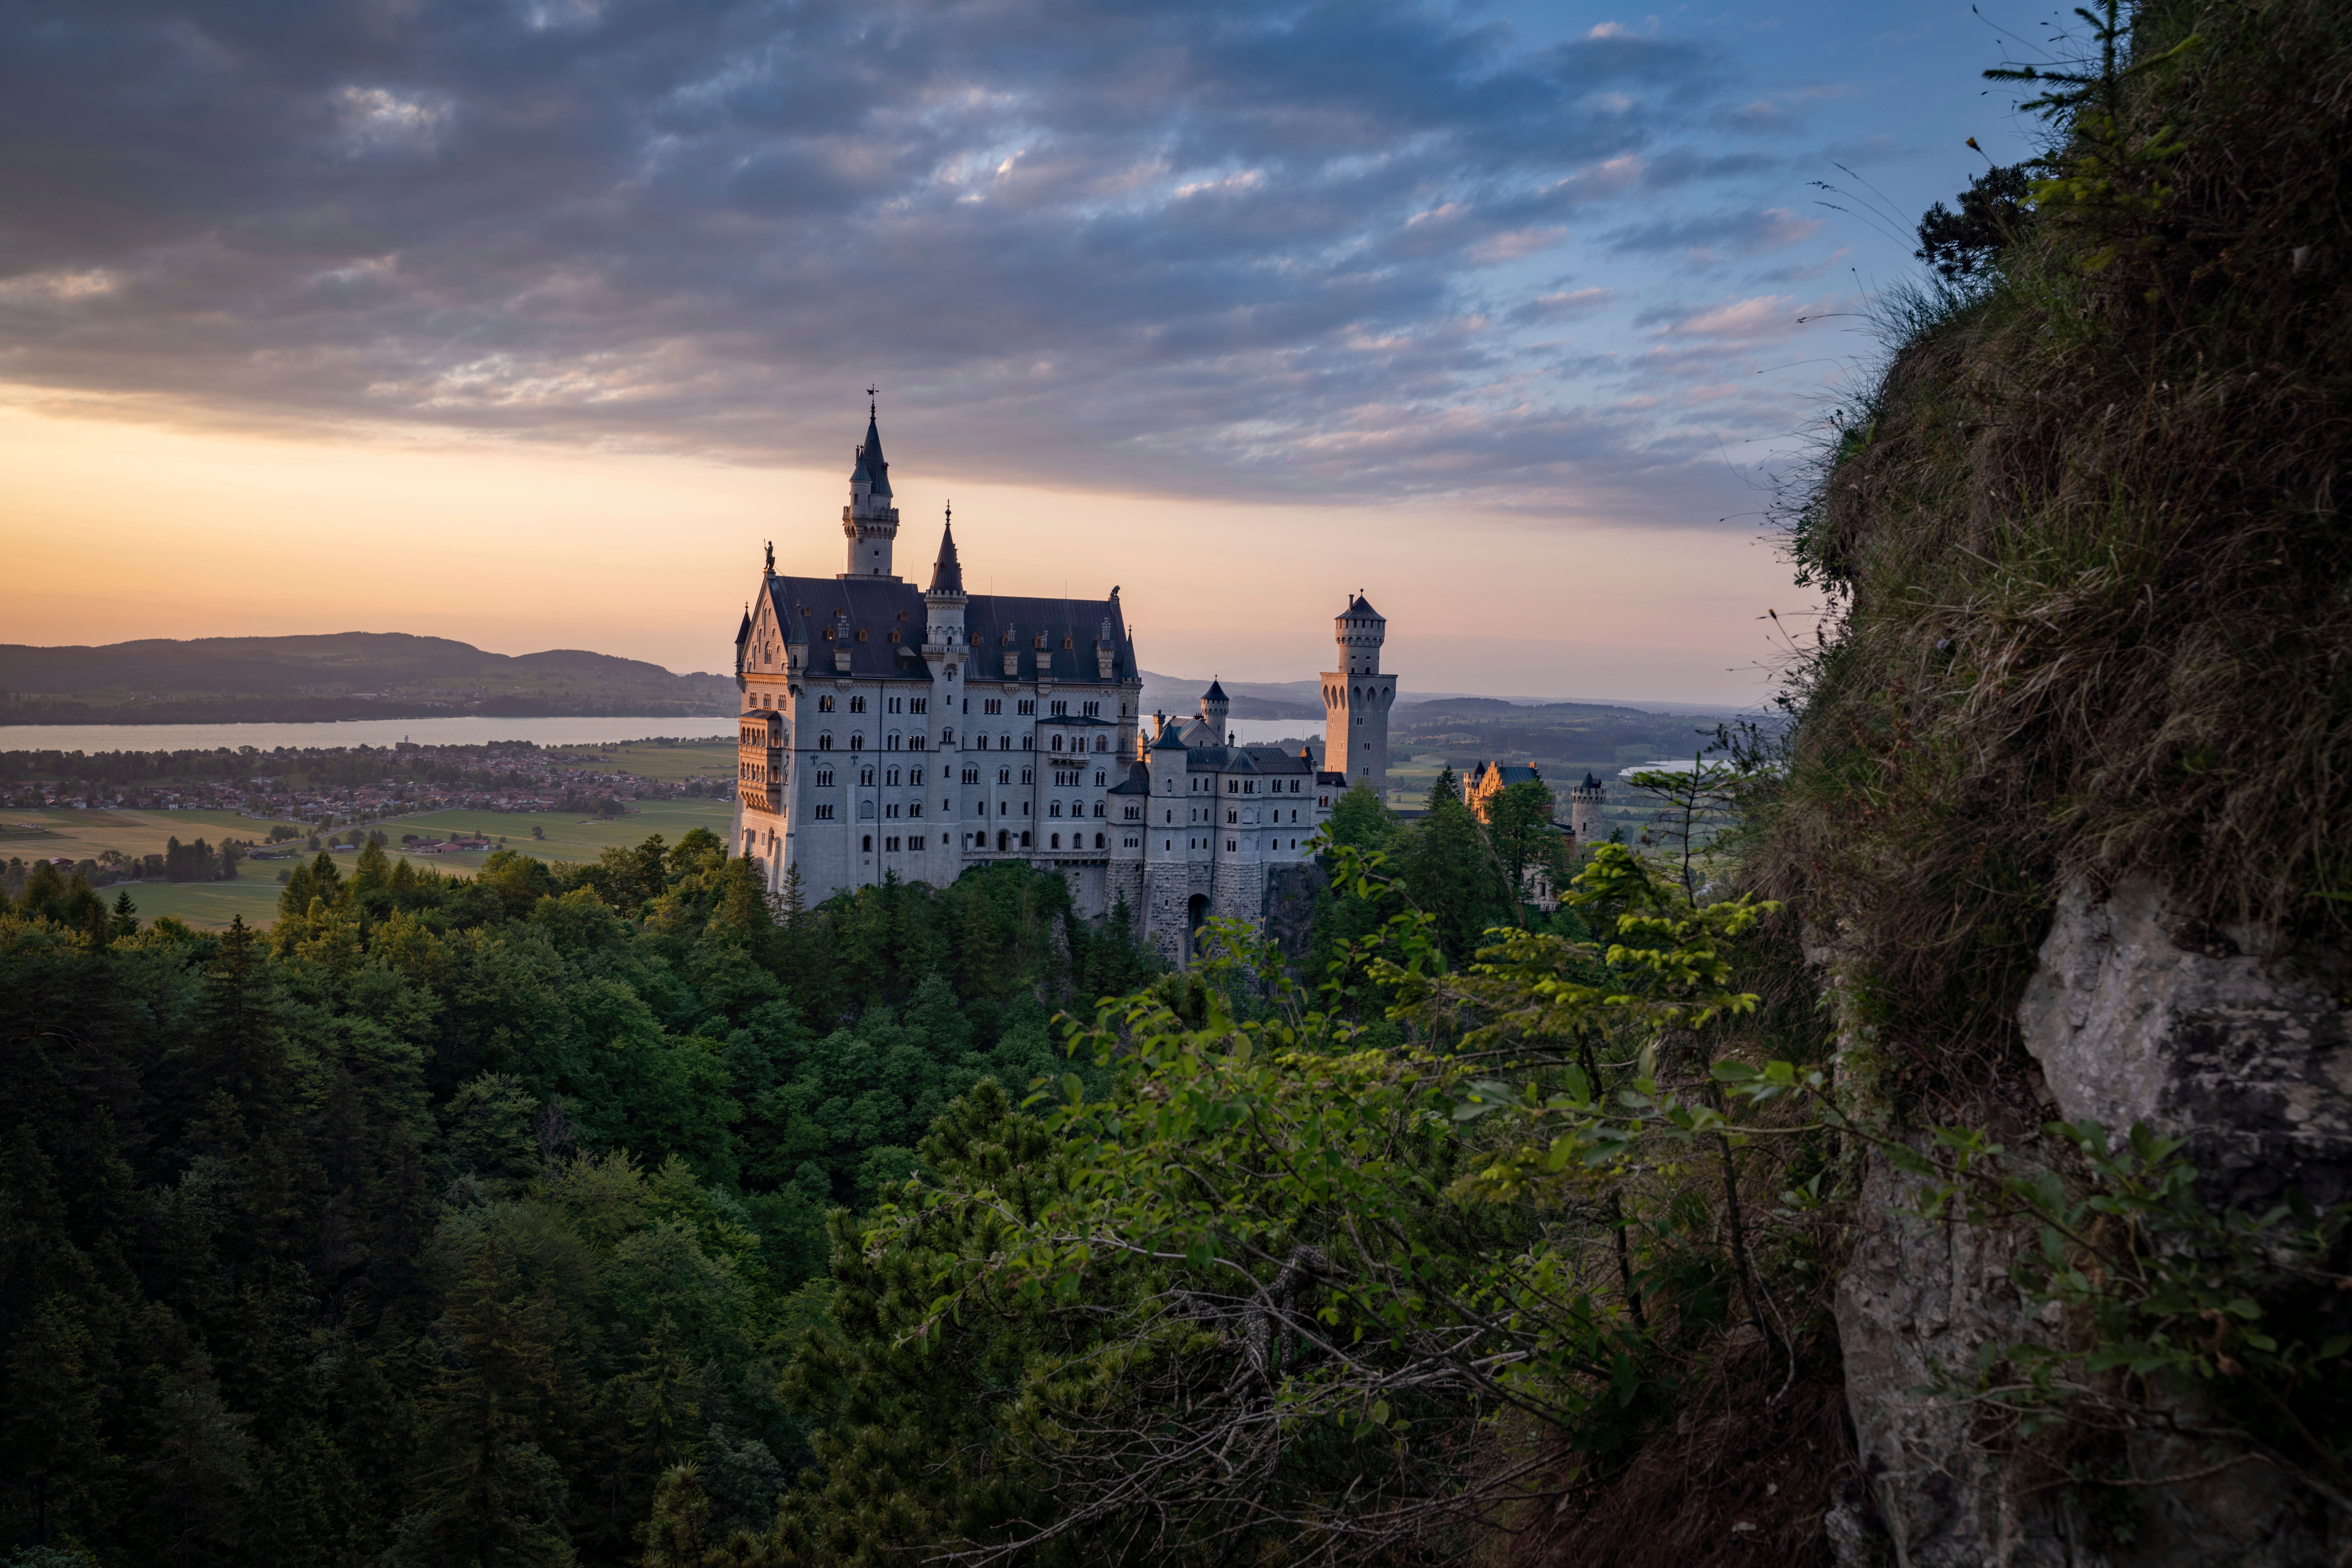 Neuschwanstein castle sits in the foothills of the Alps on Germany’s southern edge